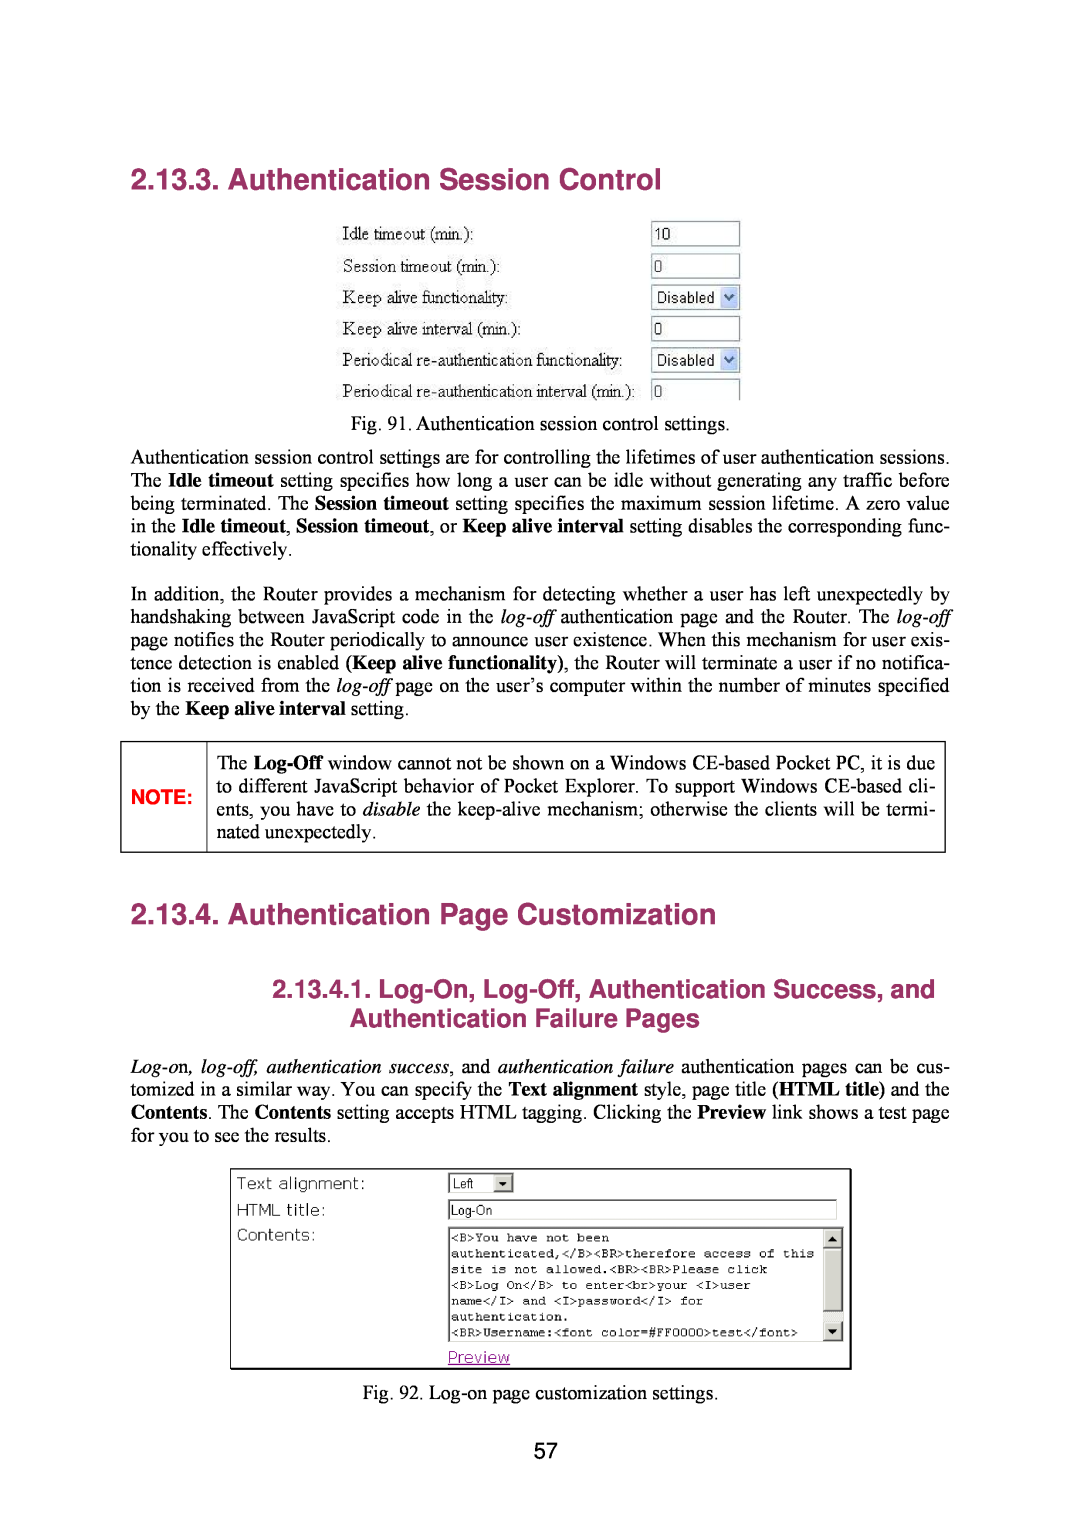 Epson IWE3200-H manual Authentication Session Control, Authentication Page Customization 